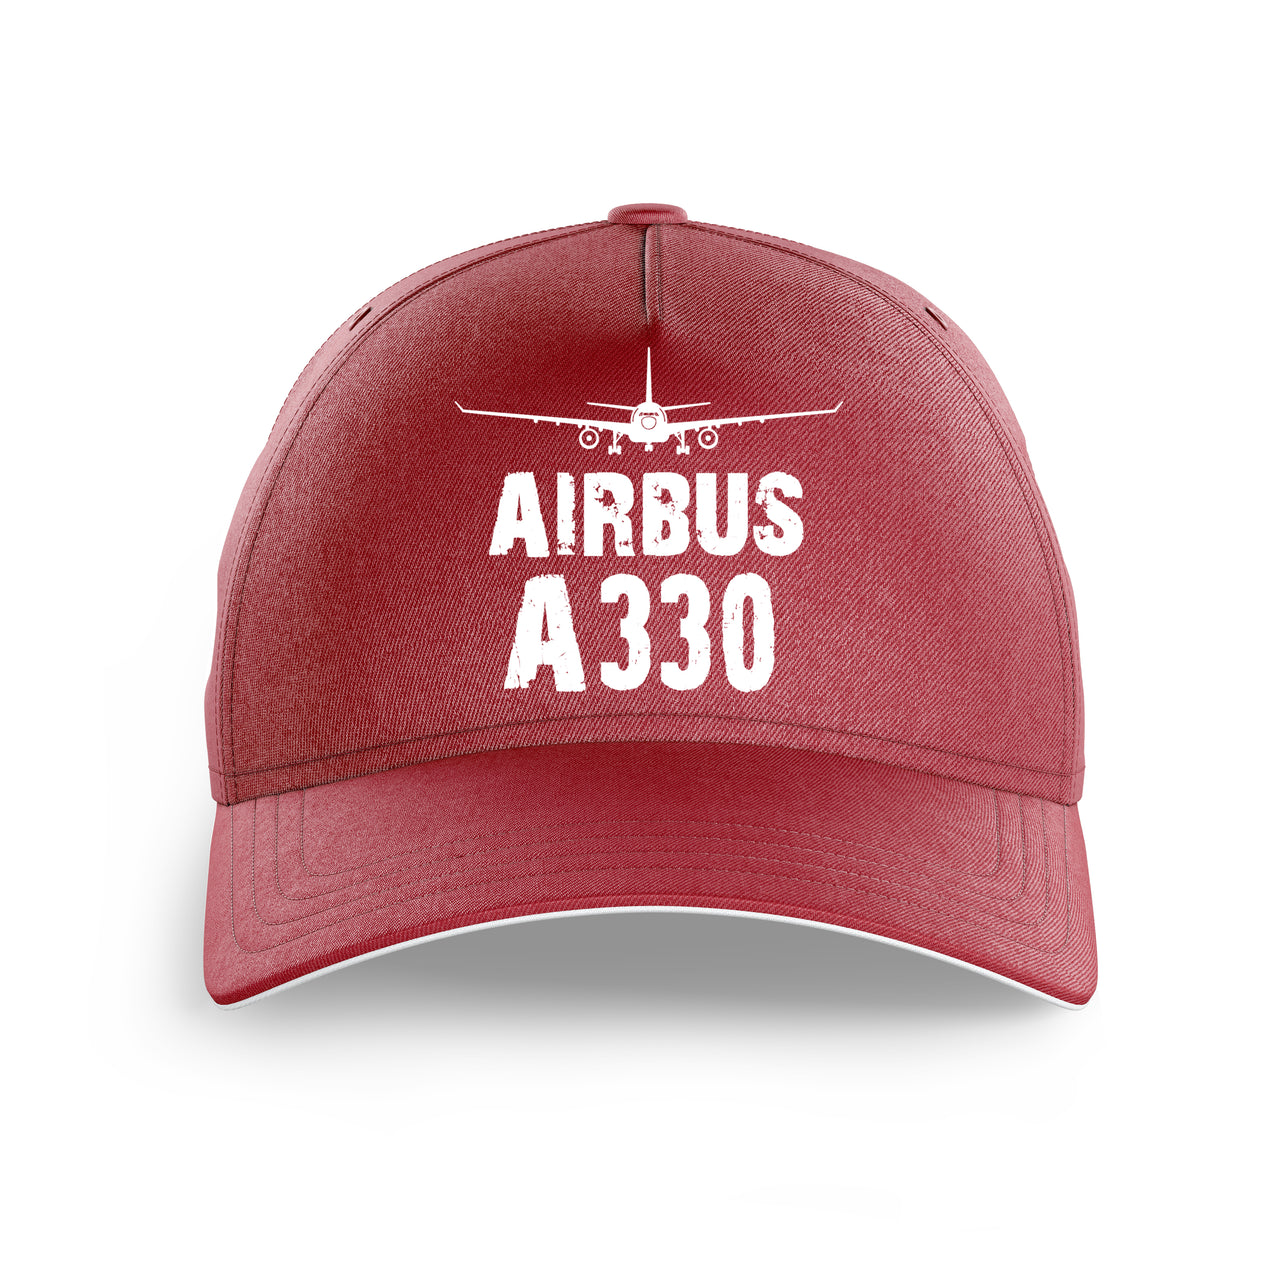 Airbus A330 & Plane Printed Hats